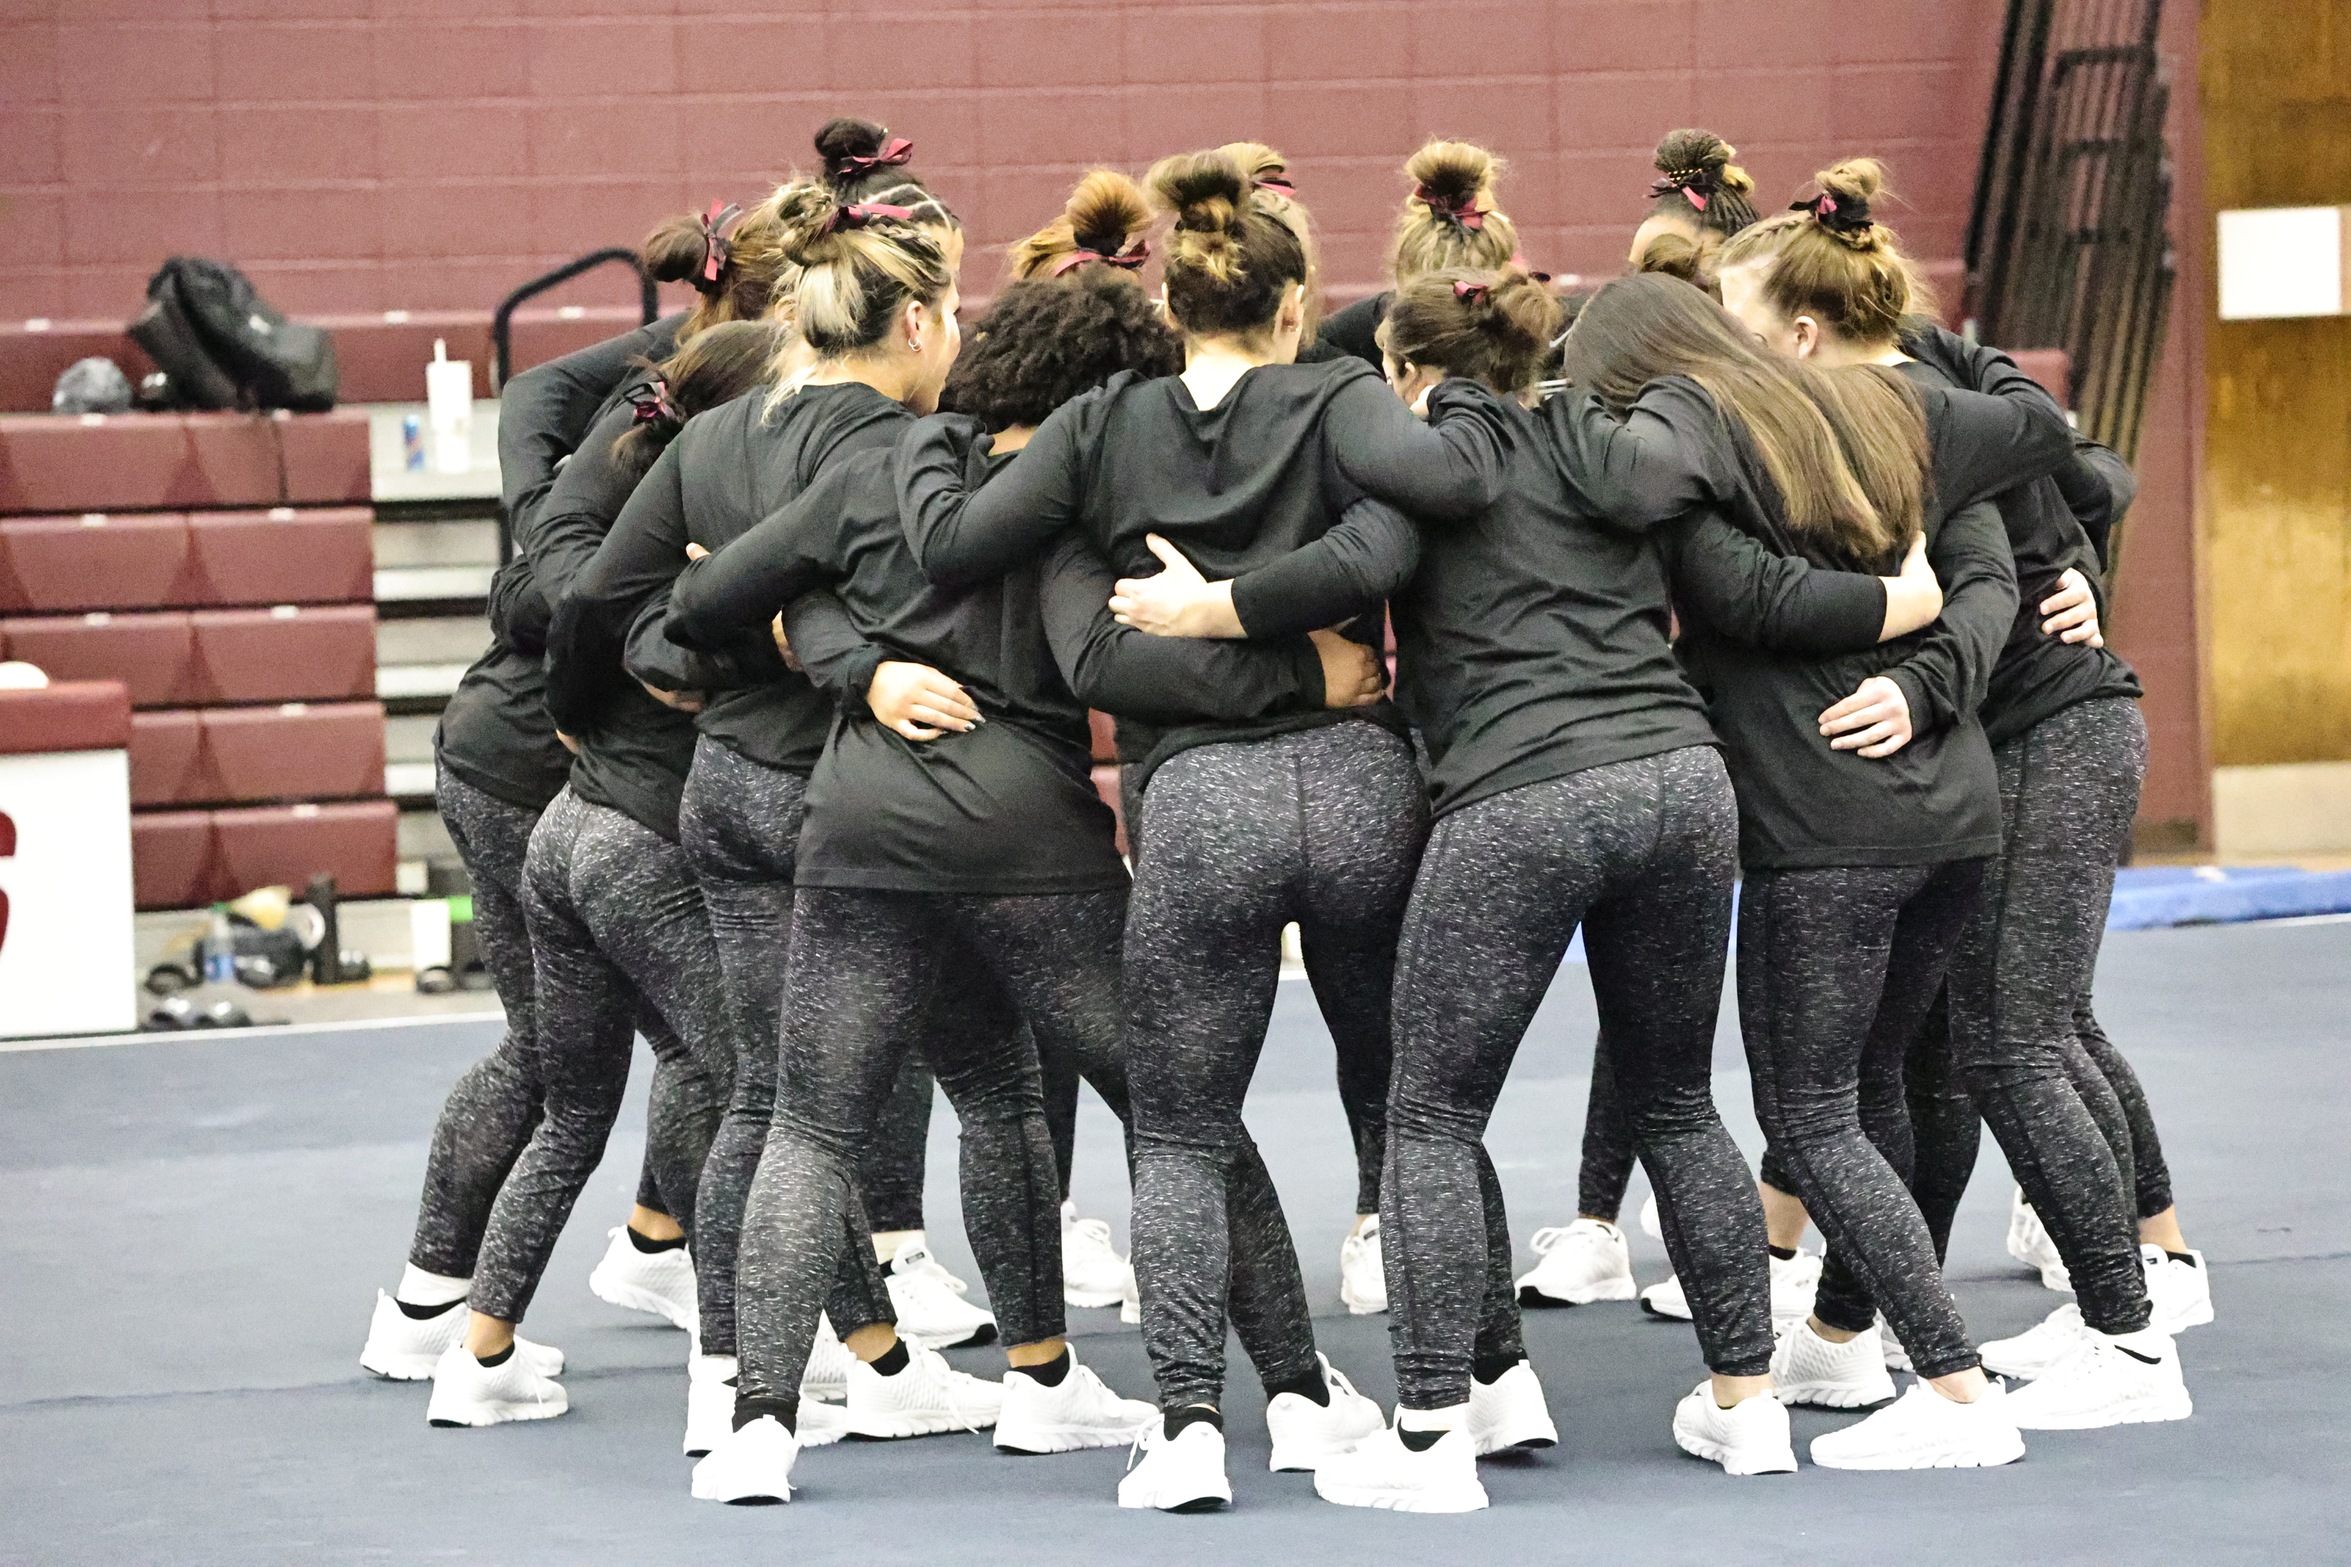 The Ladies earned identical season-high scores (189.150) in both meets at home this weekend.